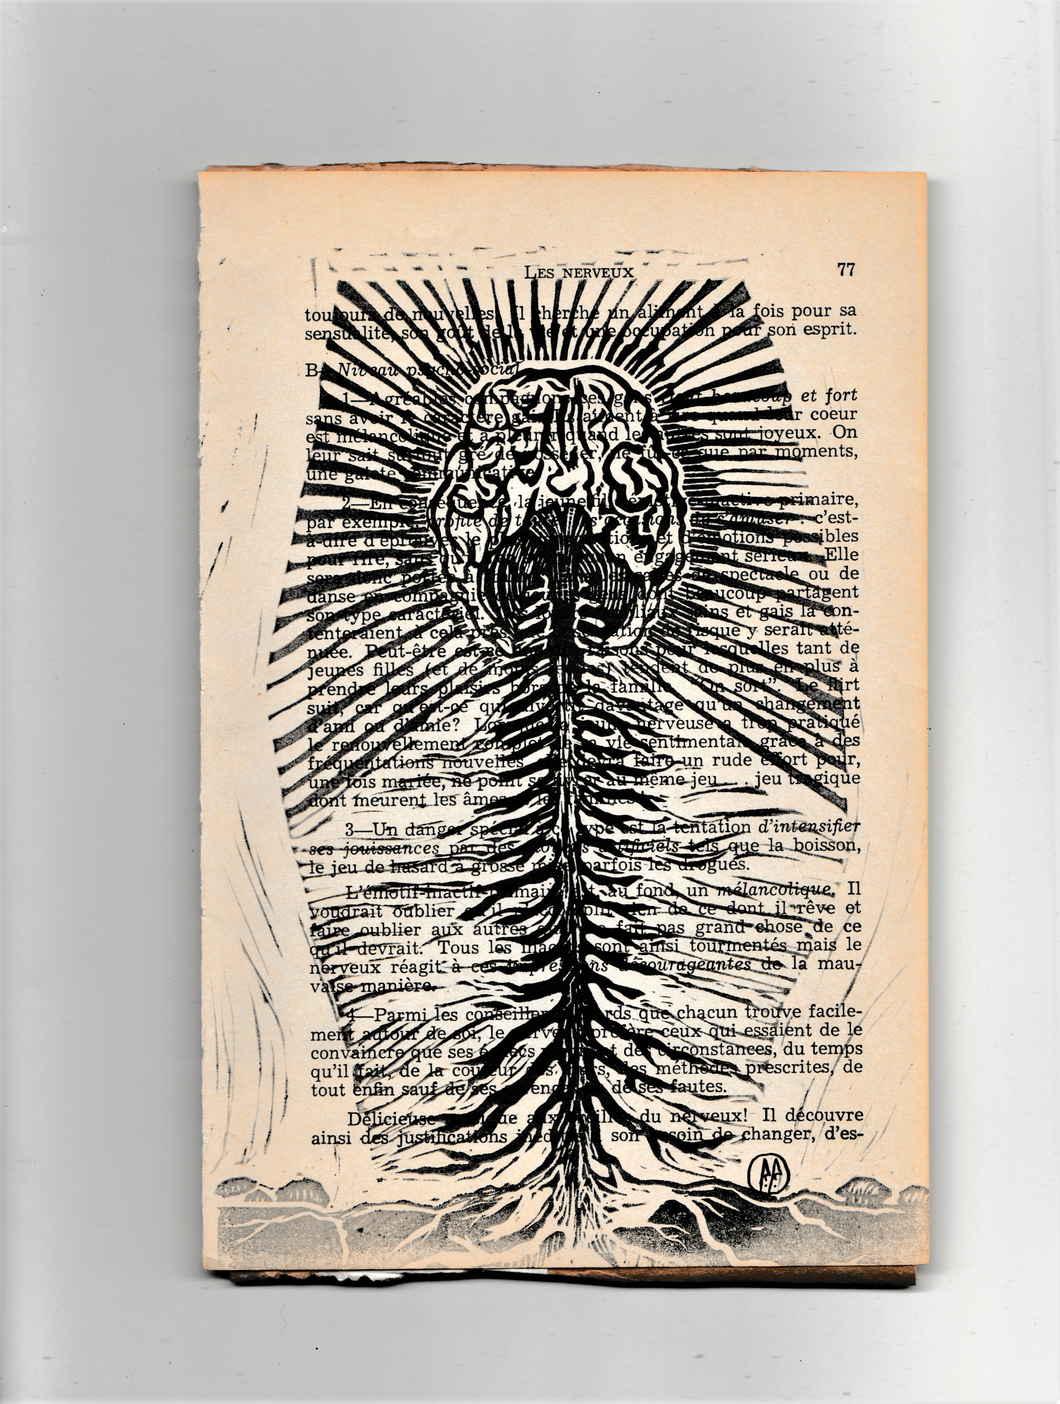 Cerebral roots - Linocut print on book page